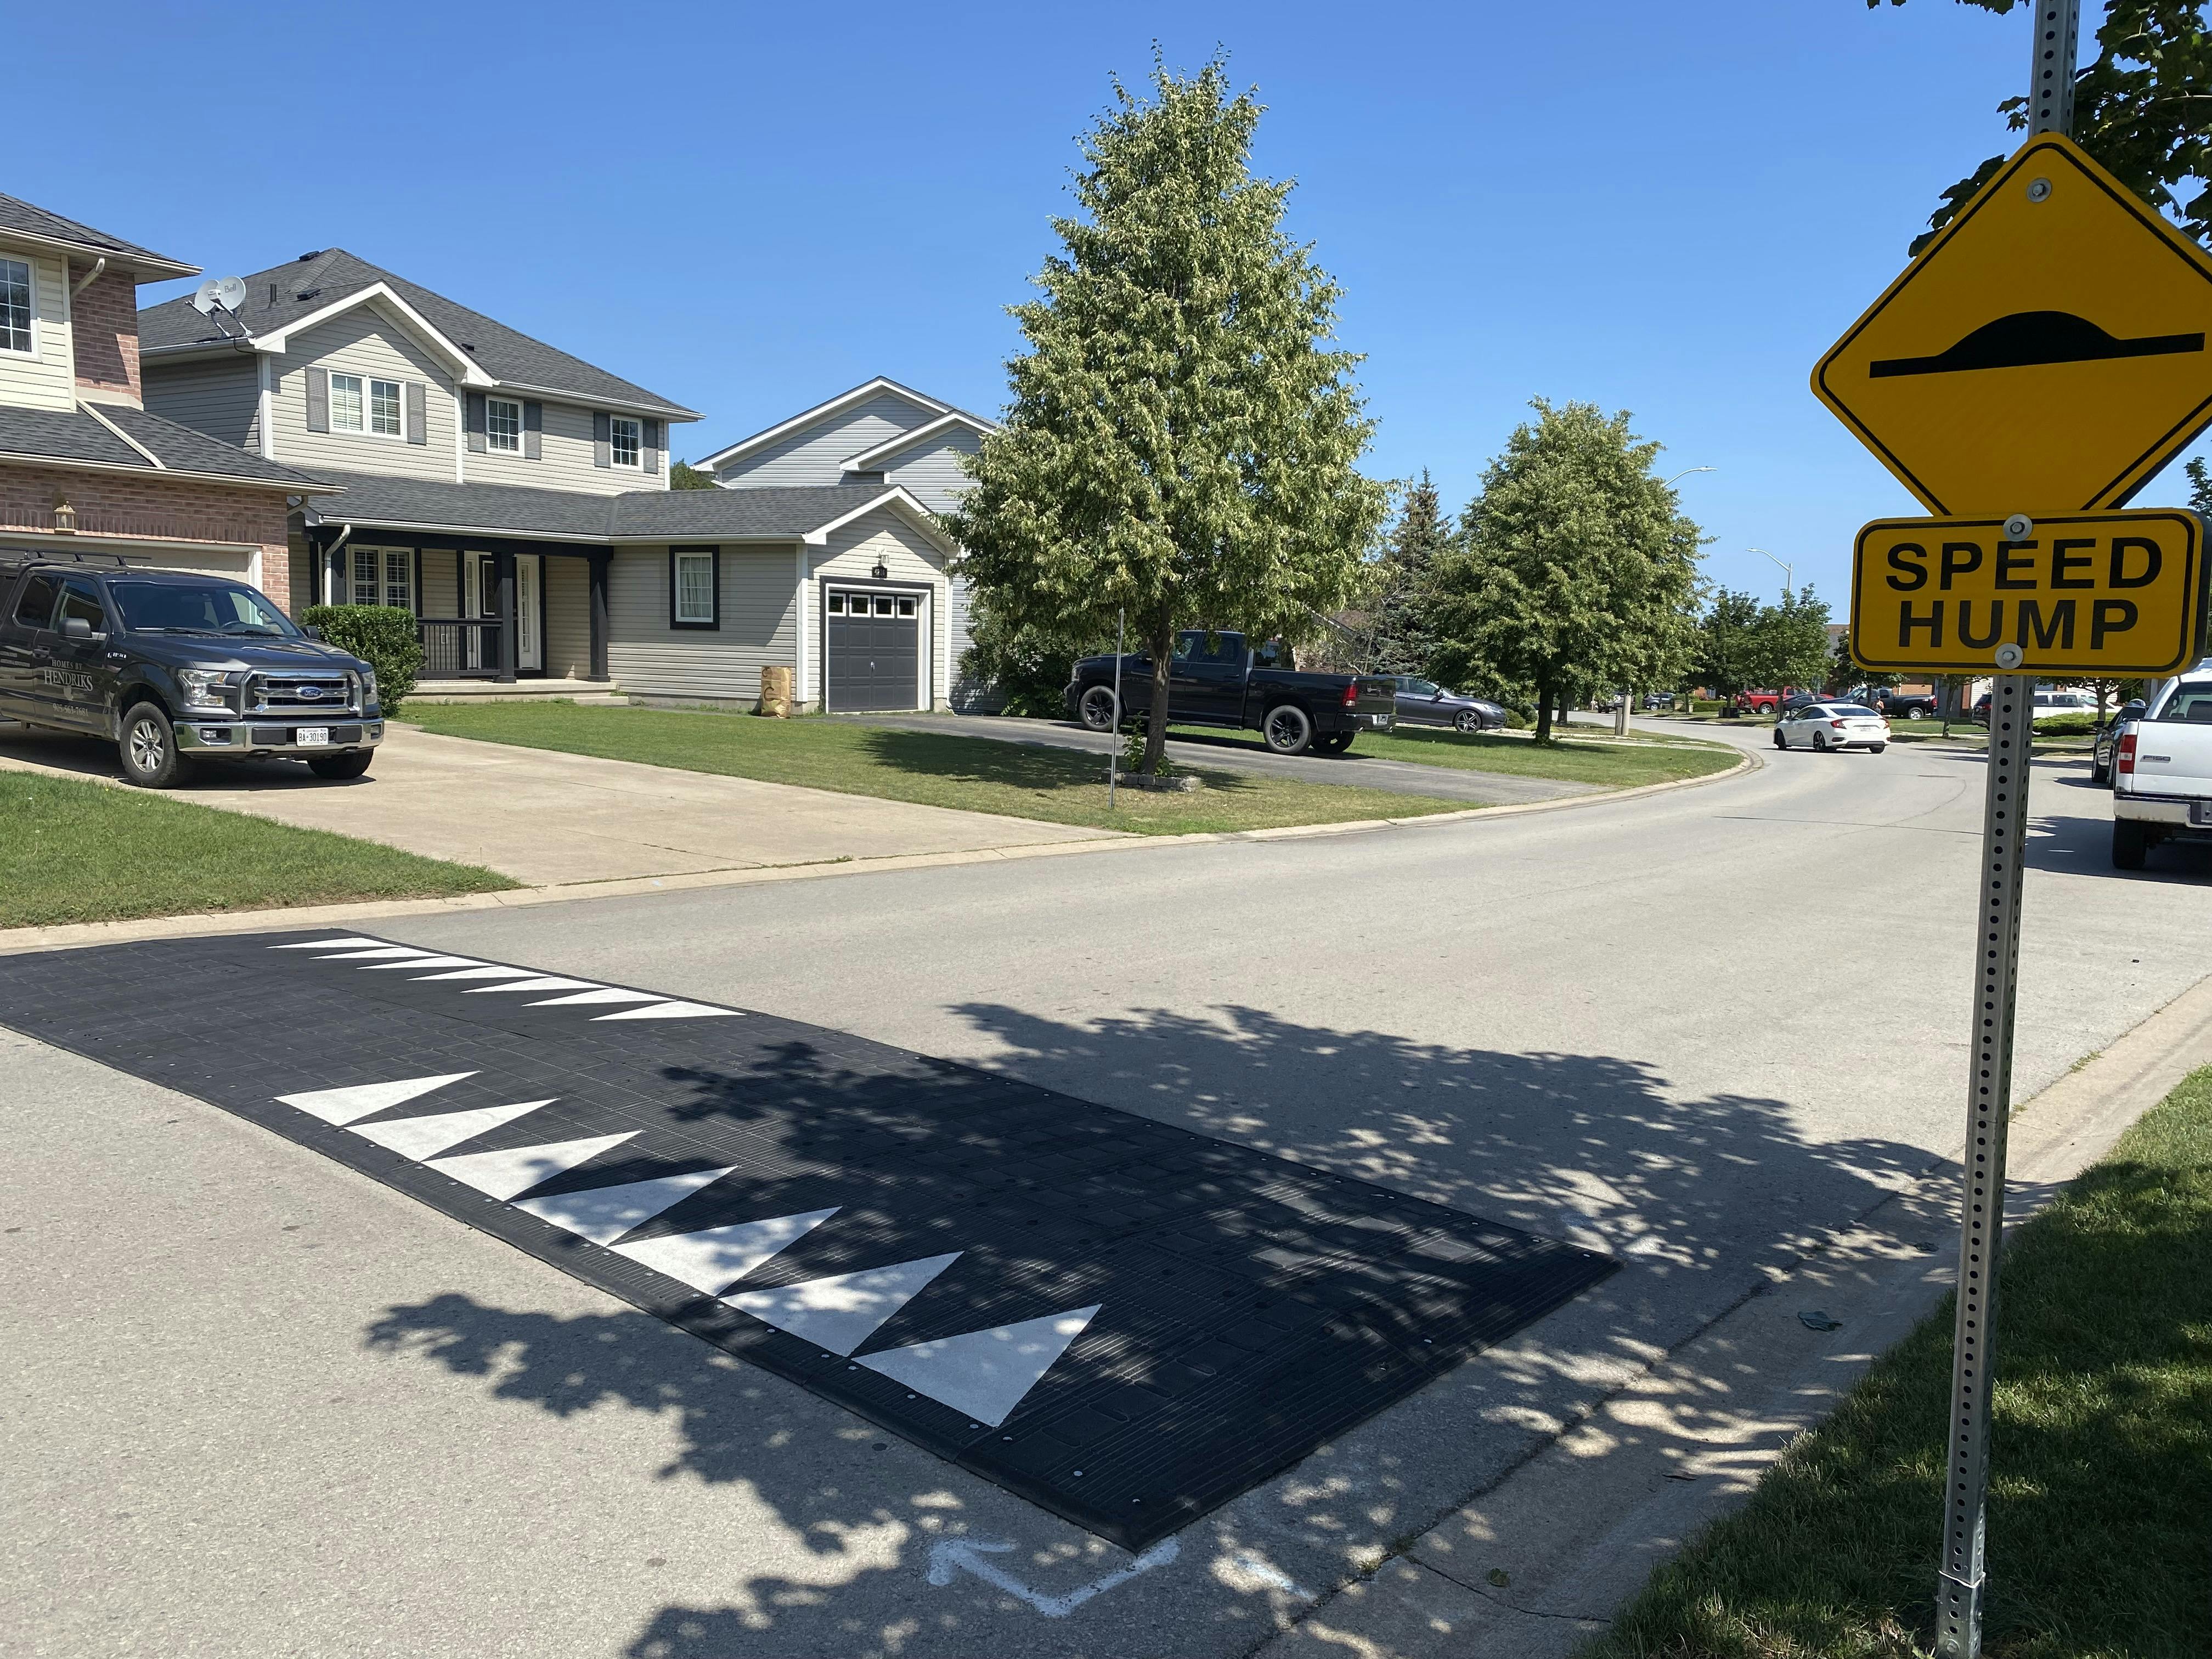 Temporary speed hump on Stadelbauer Drive